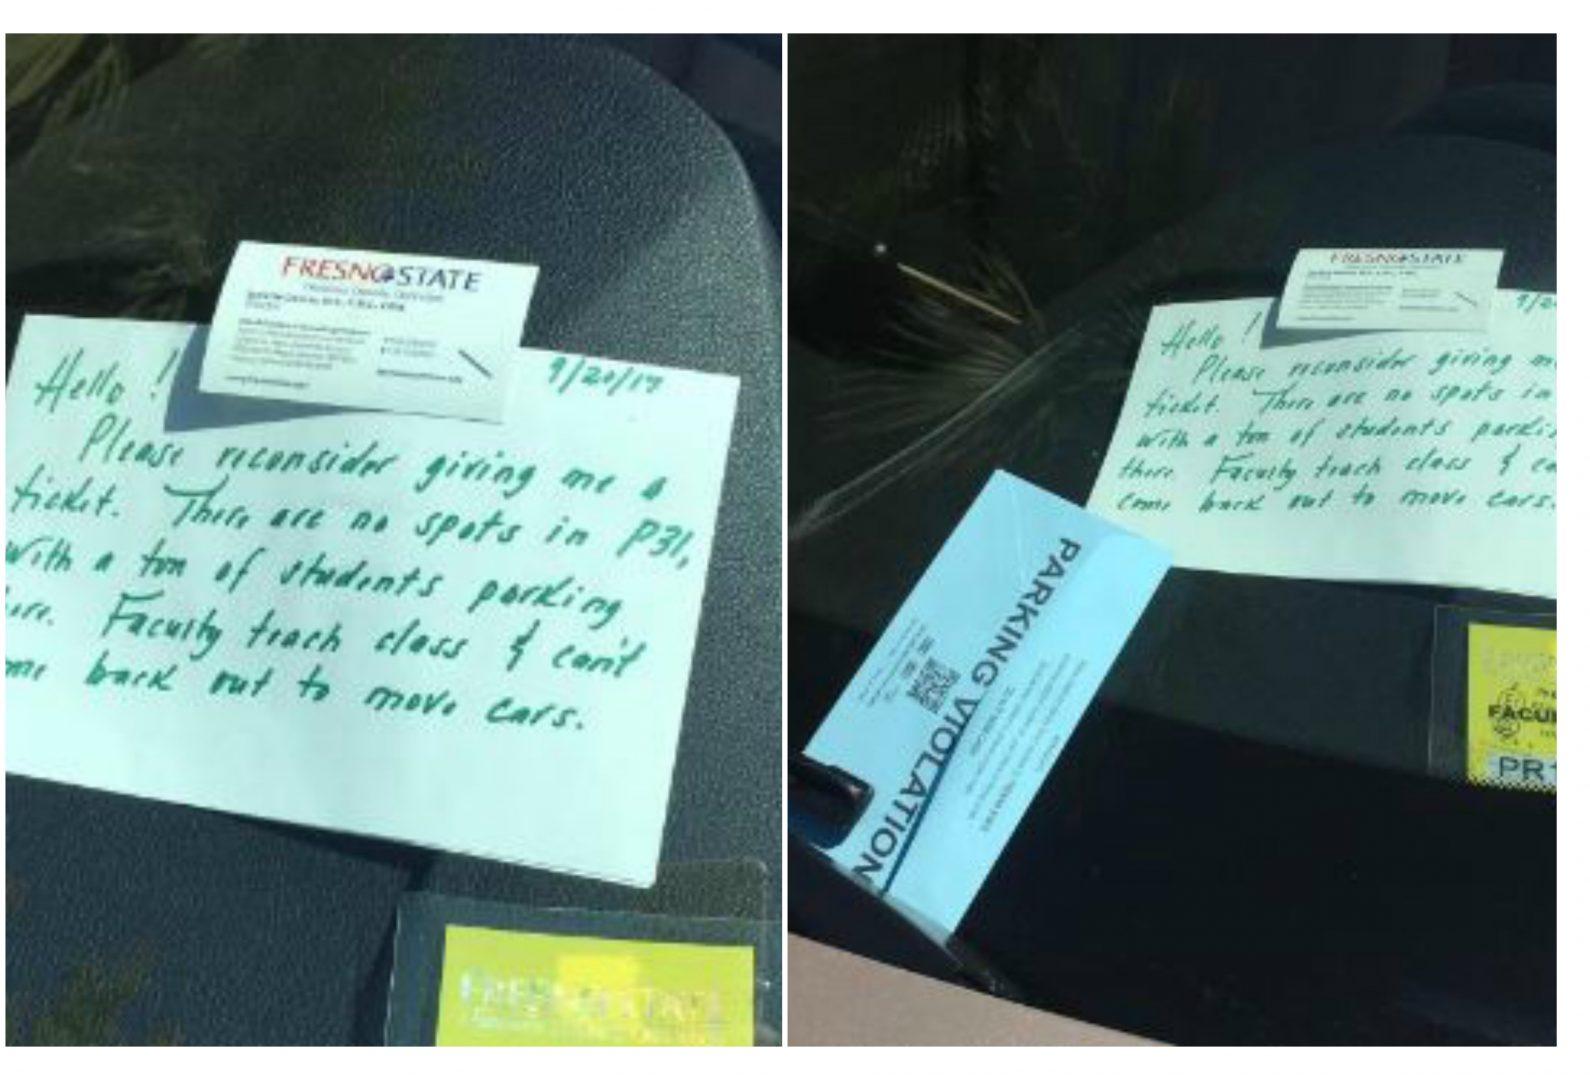 A note left by a Fresno State employee asking parking police not to ticket her if she went over the 30-minute parking limit. Parking enforcers ignored the request.